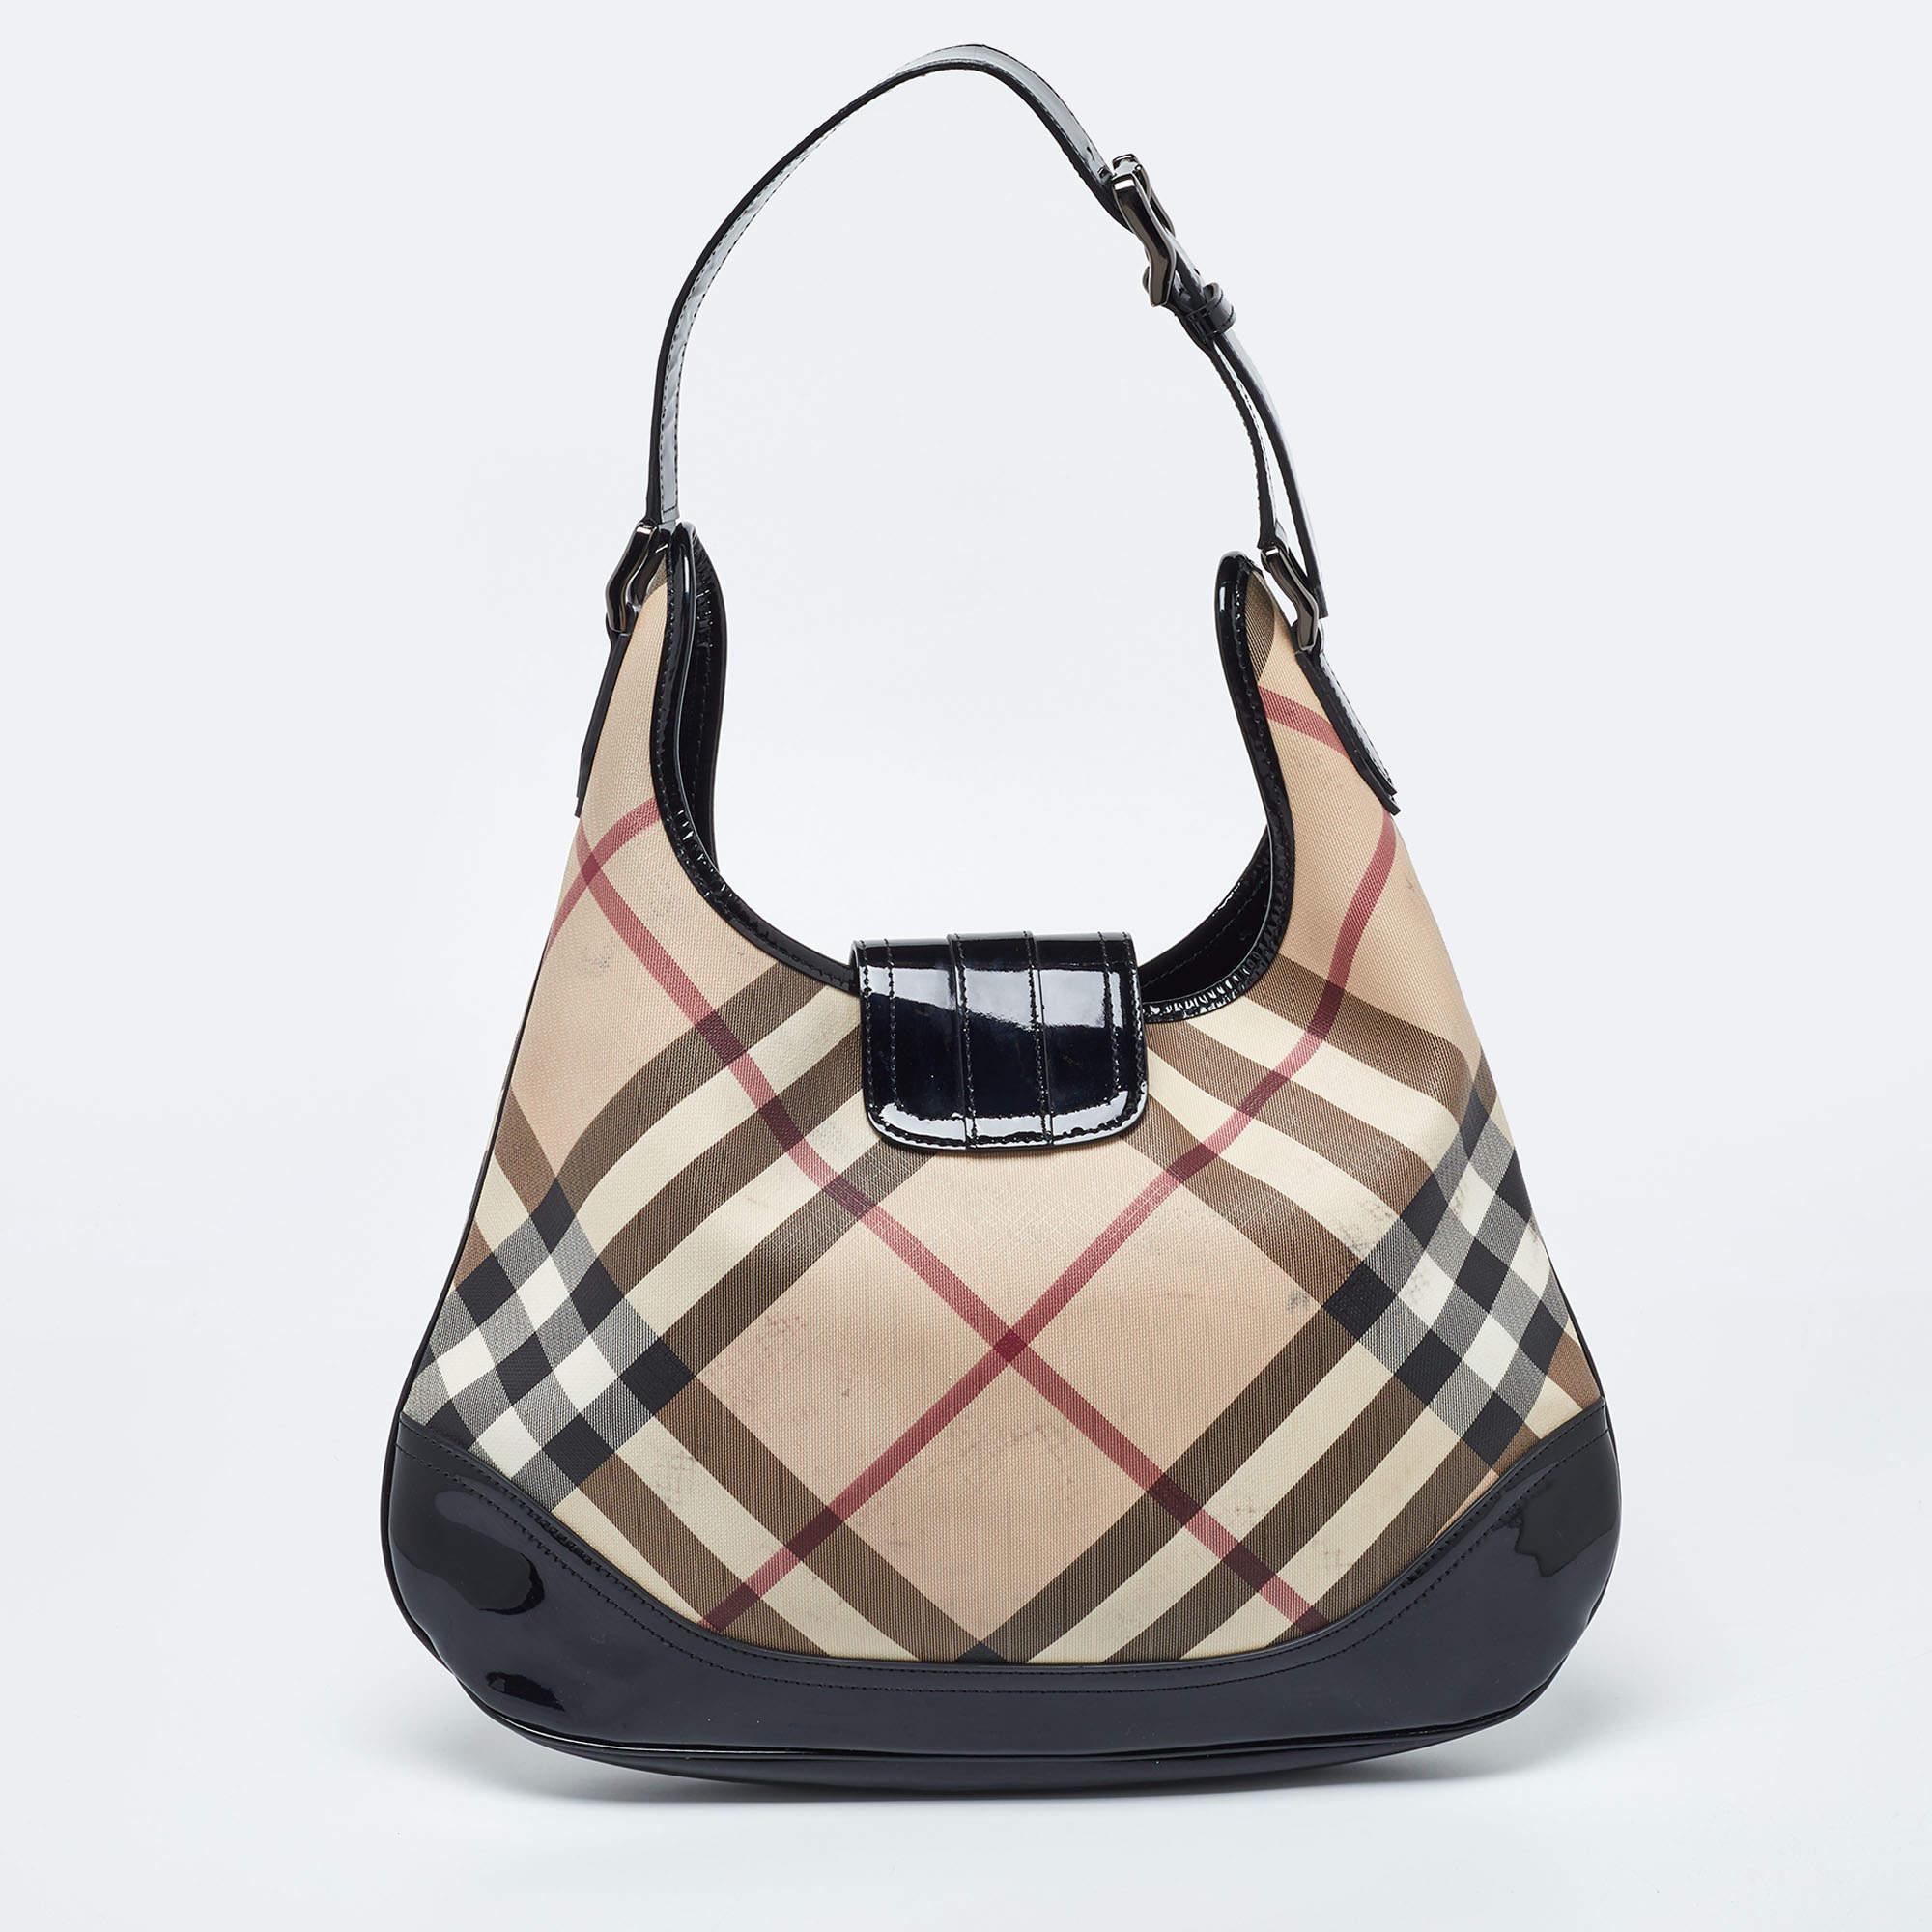 Burberry Beige/Black Nova Check PVC and Patent Leather Brooke Hobo For Sale 5